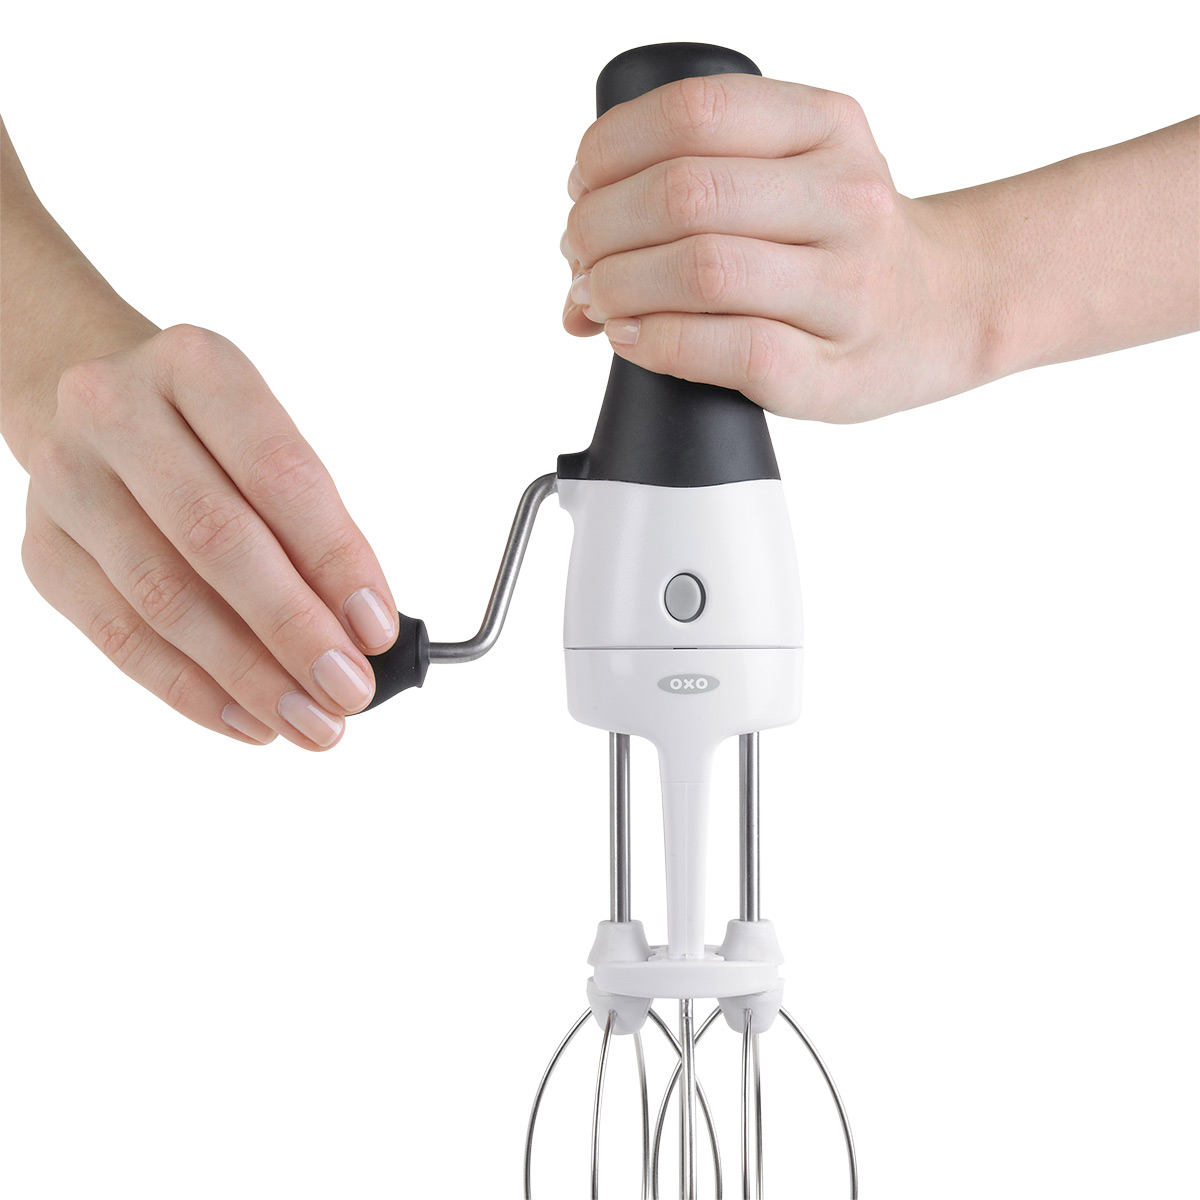 https://www.containerstore.com/catalogimages/427743/10086150-OXO-Egg-Beater-VEN4.jpg